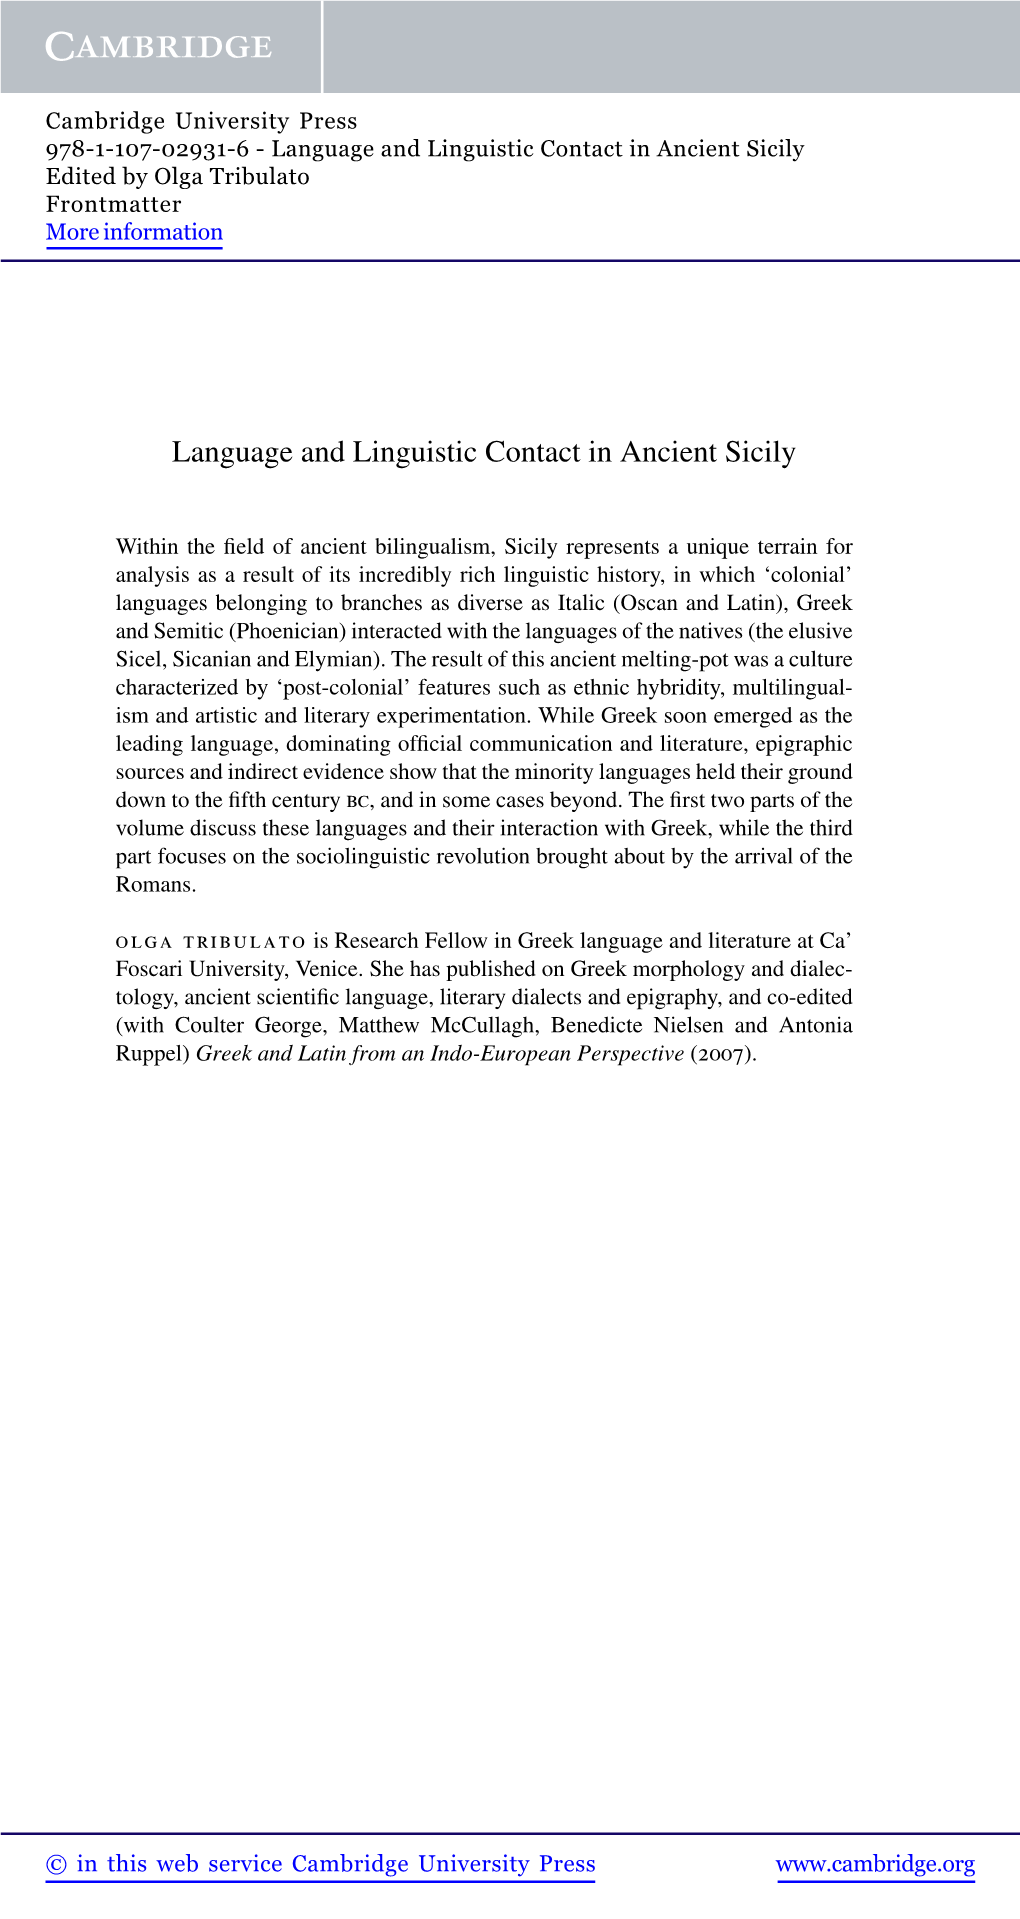 Language and Linguistic Contact in Ancient Sicily Edited by Olga Tribulato Frontmatter More Information